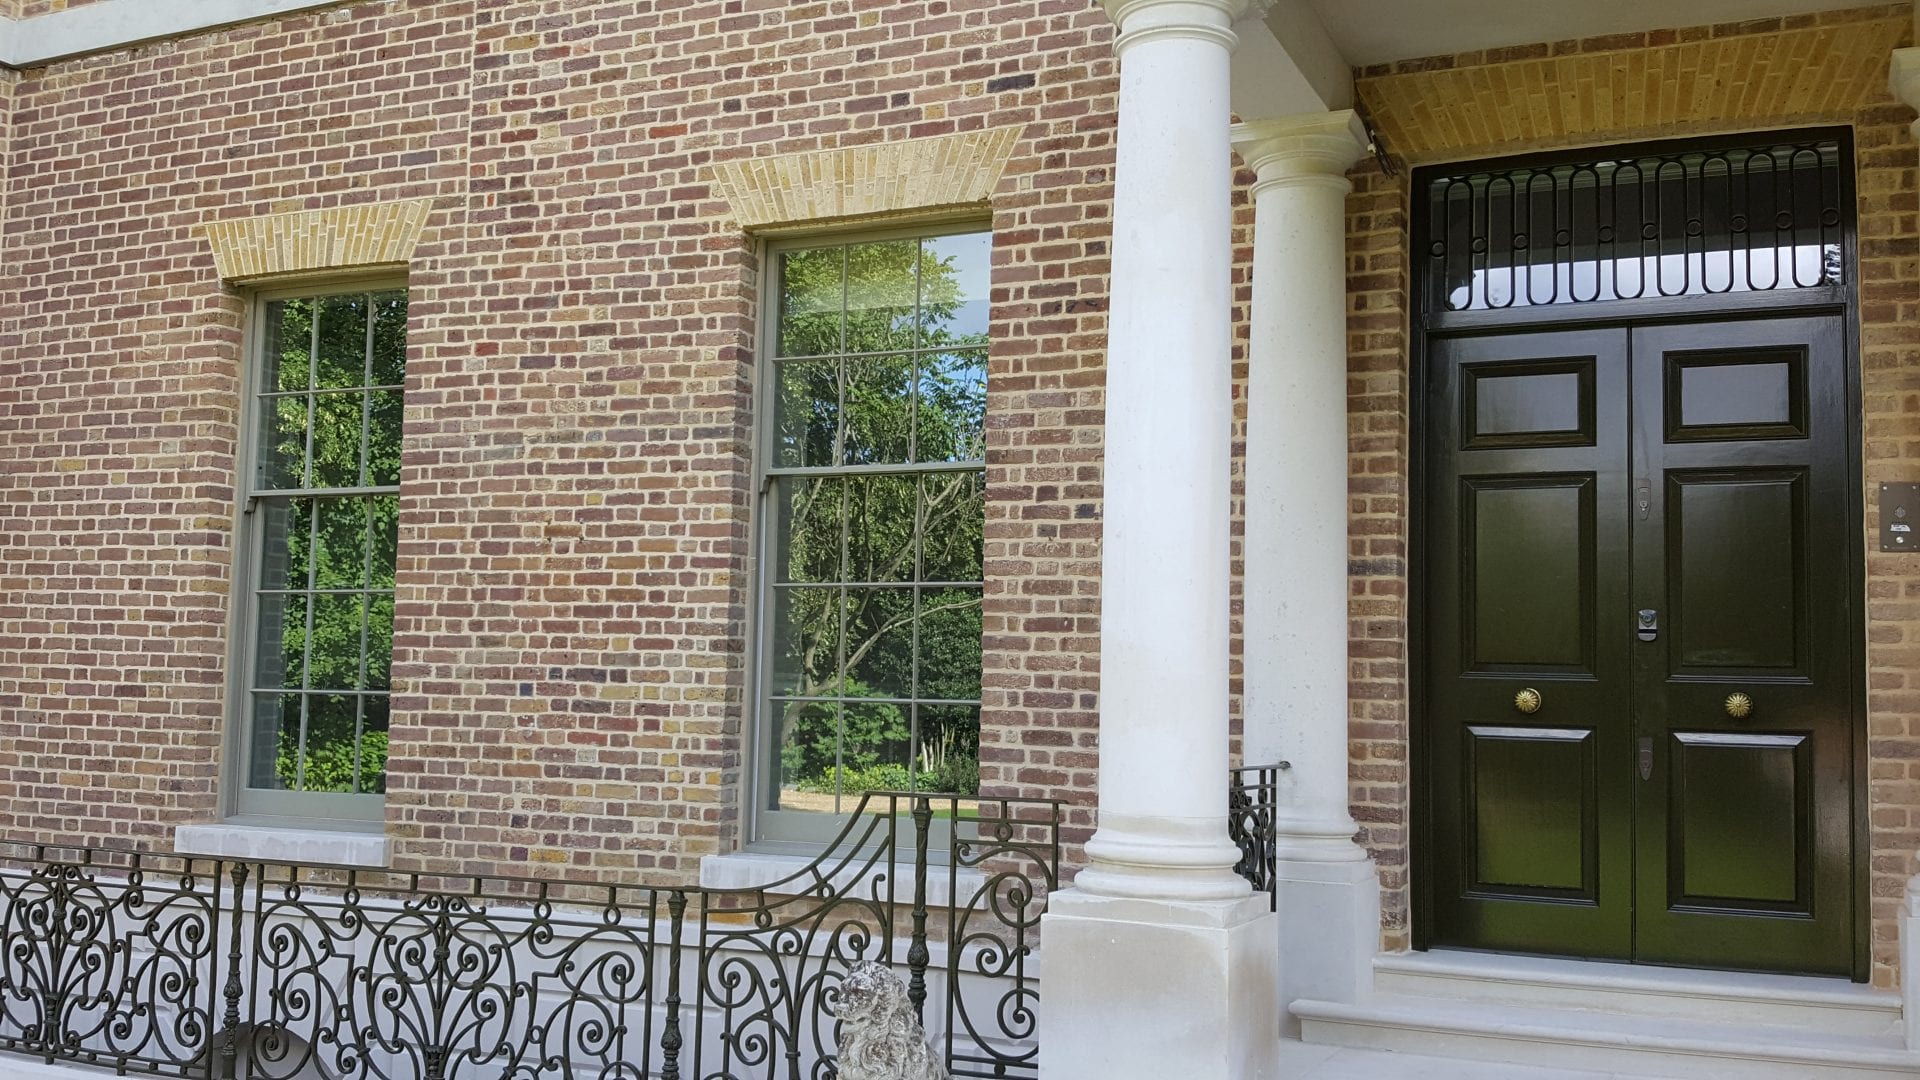 double glazing on a rich looking house with timber windows and impressive double wooden doors in london